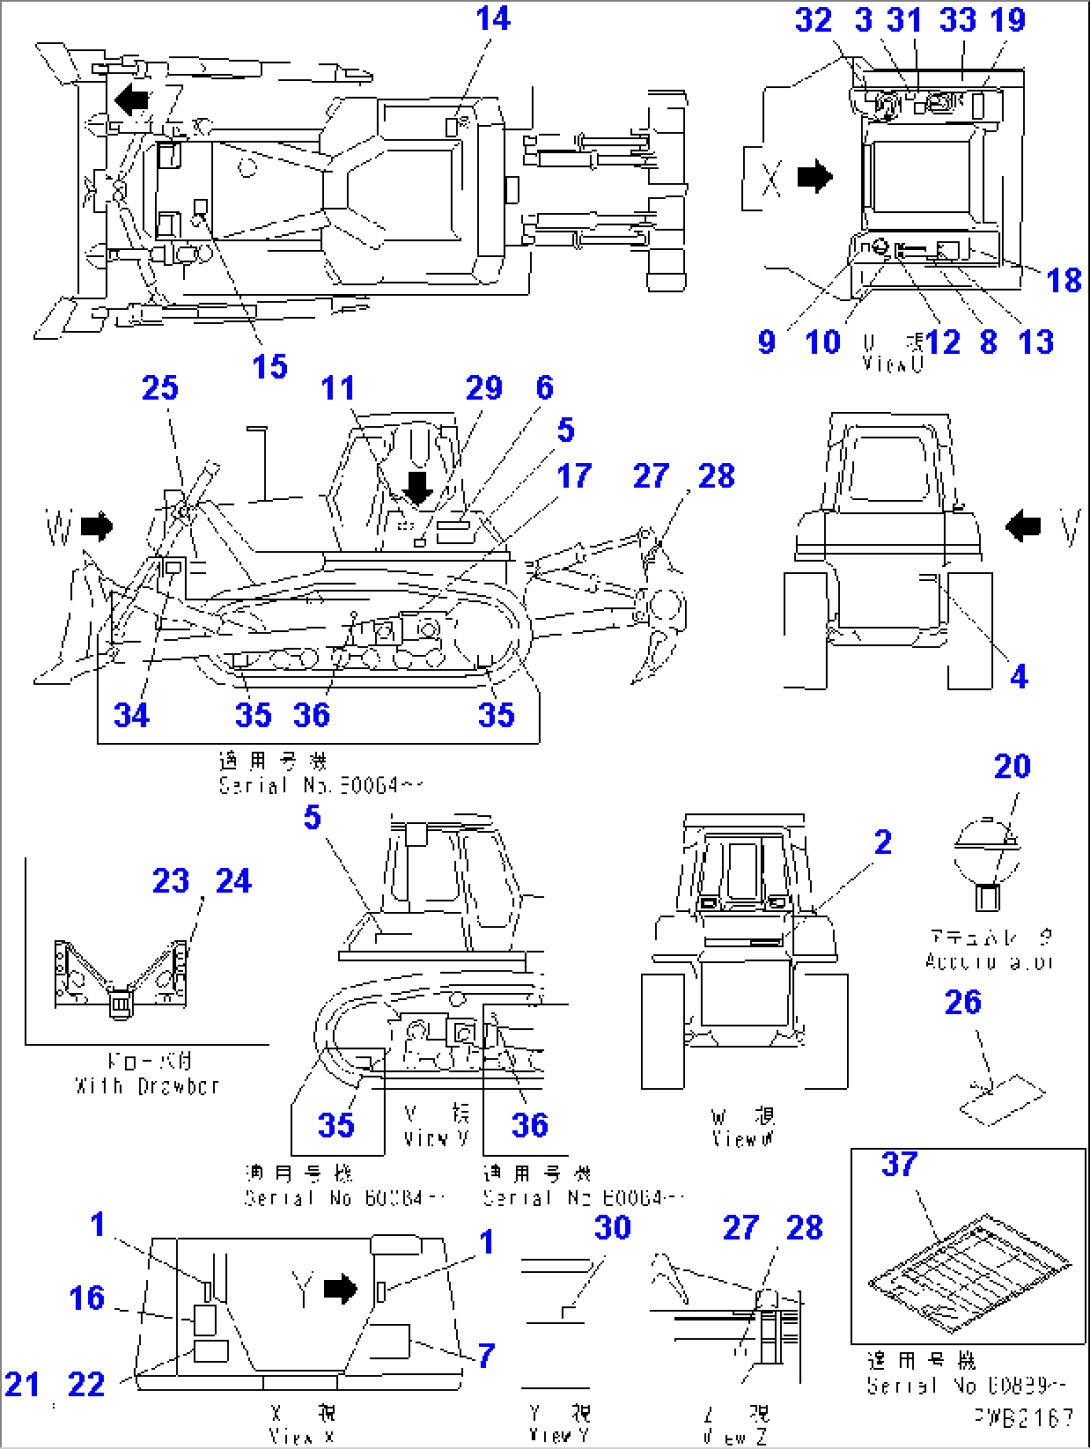 MARKS AND PLATES (ENGLISH EC SPEC.)